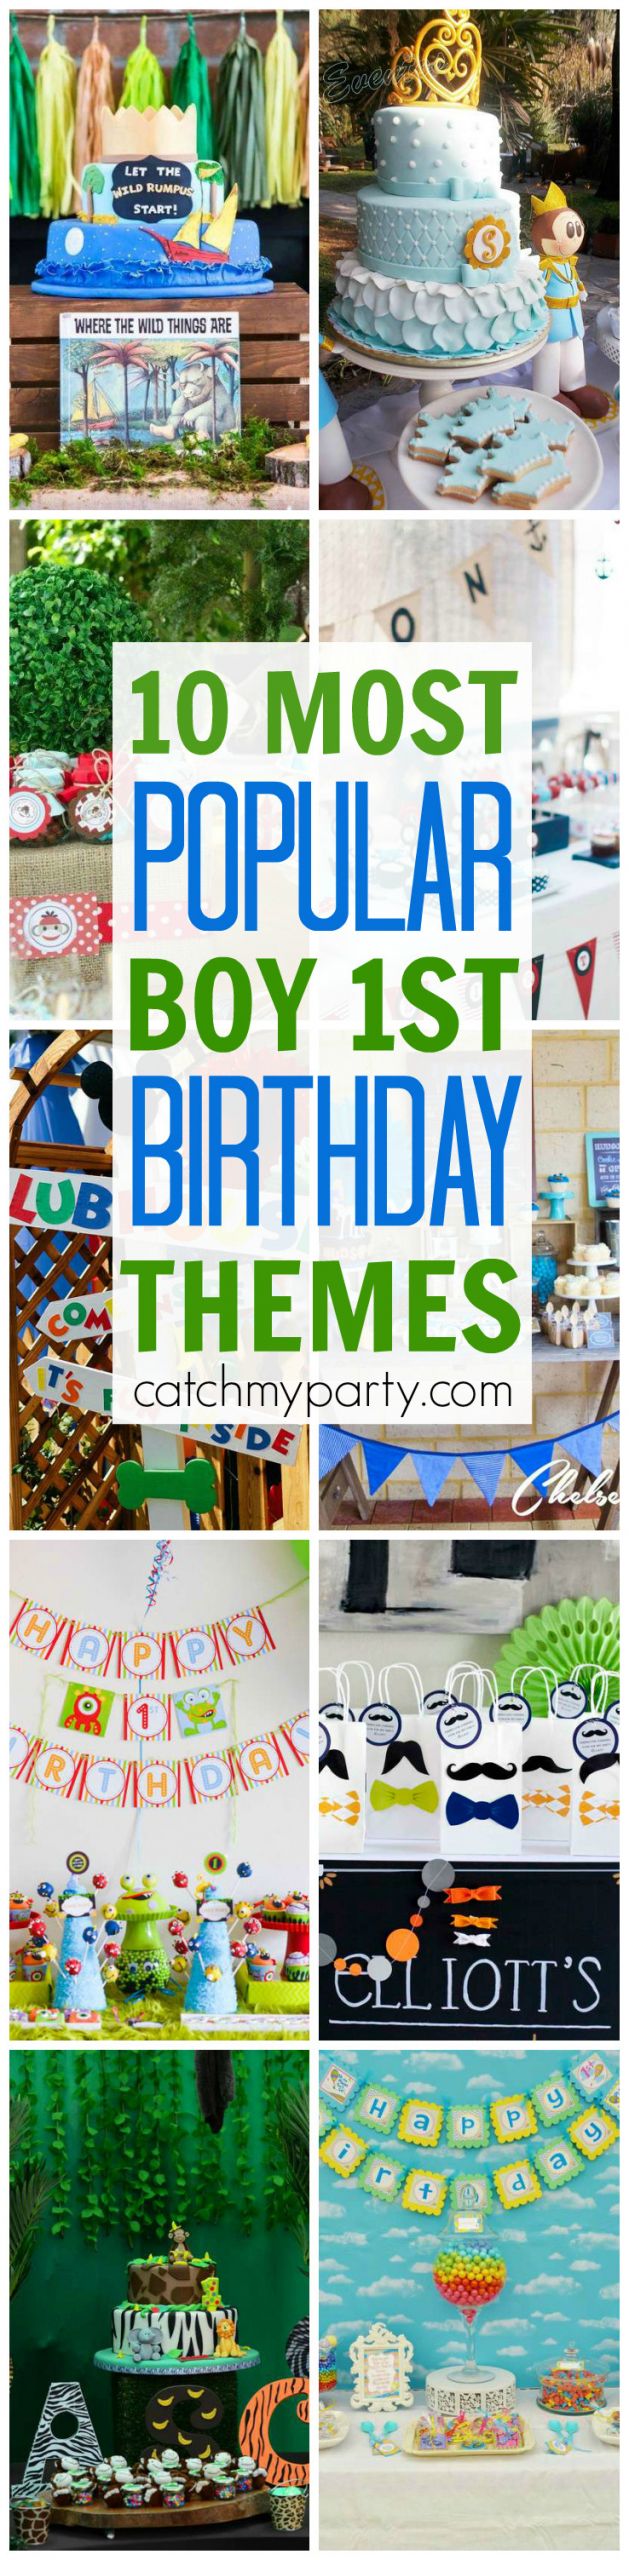 1St Birthday Party Ideas For Boys Themes
 10 Most Popular Boy 1st Birthday Party Themes